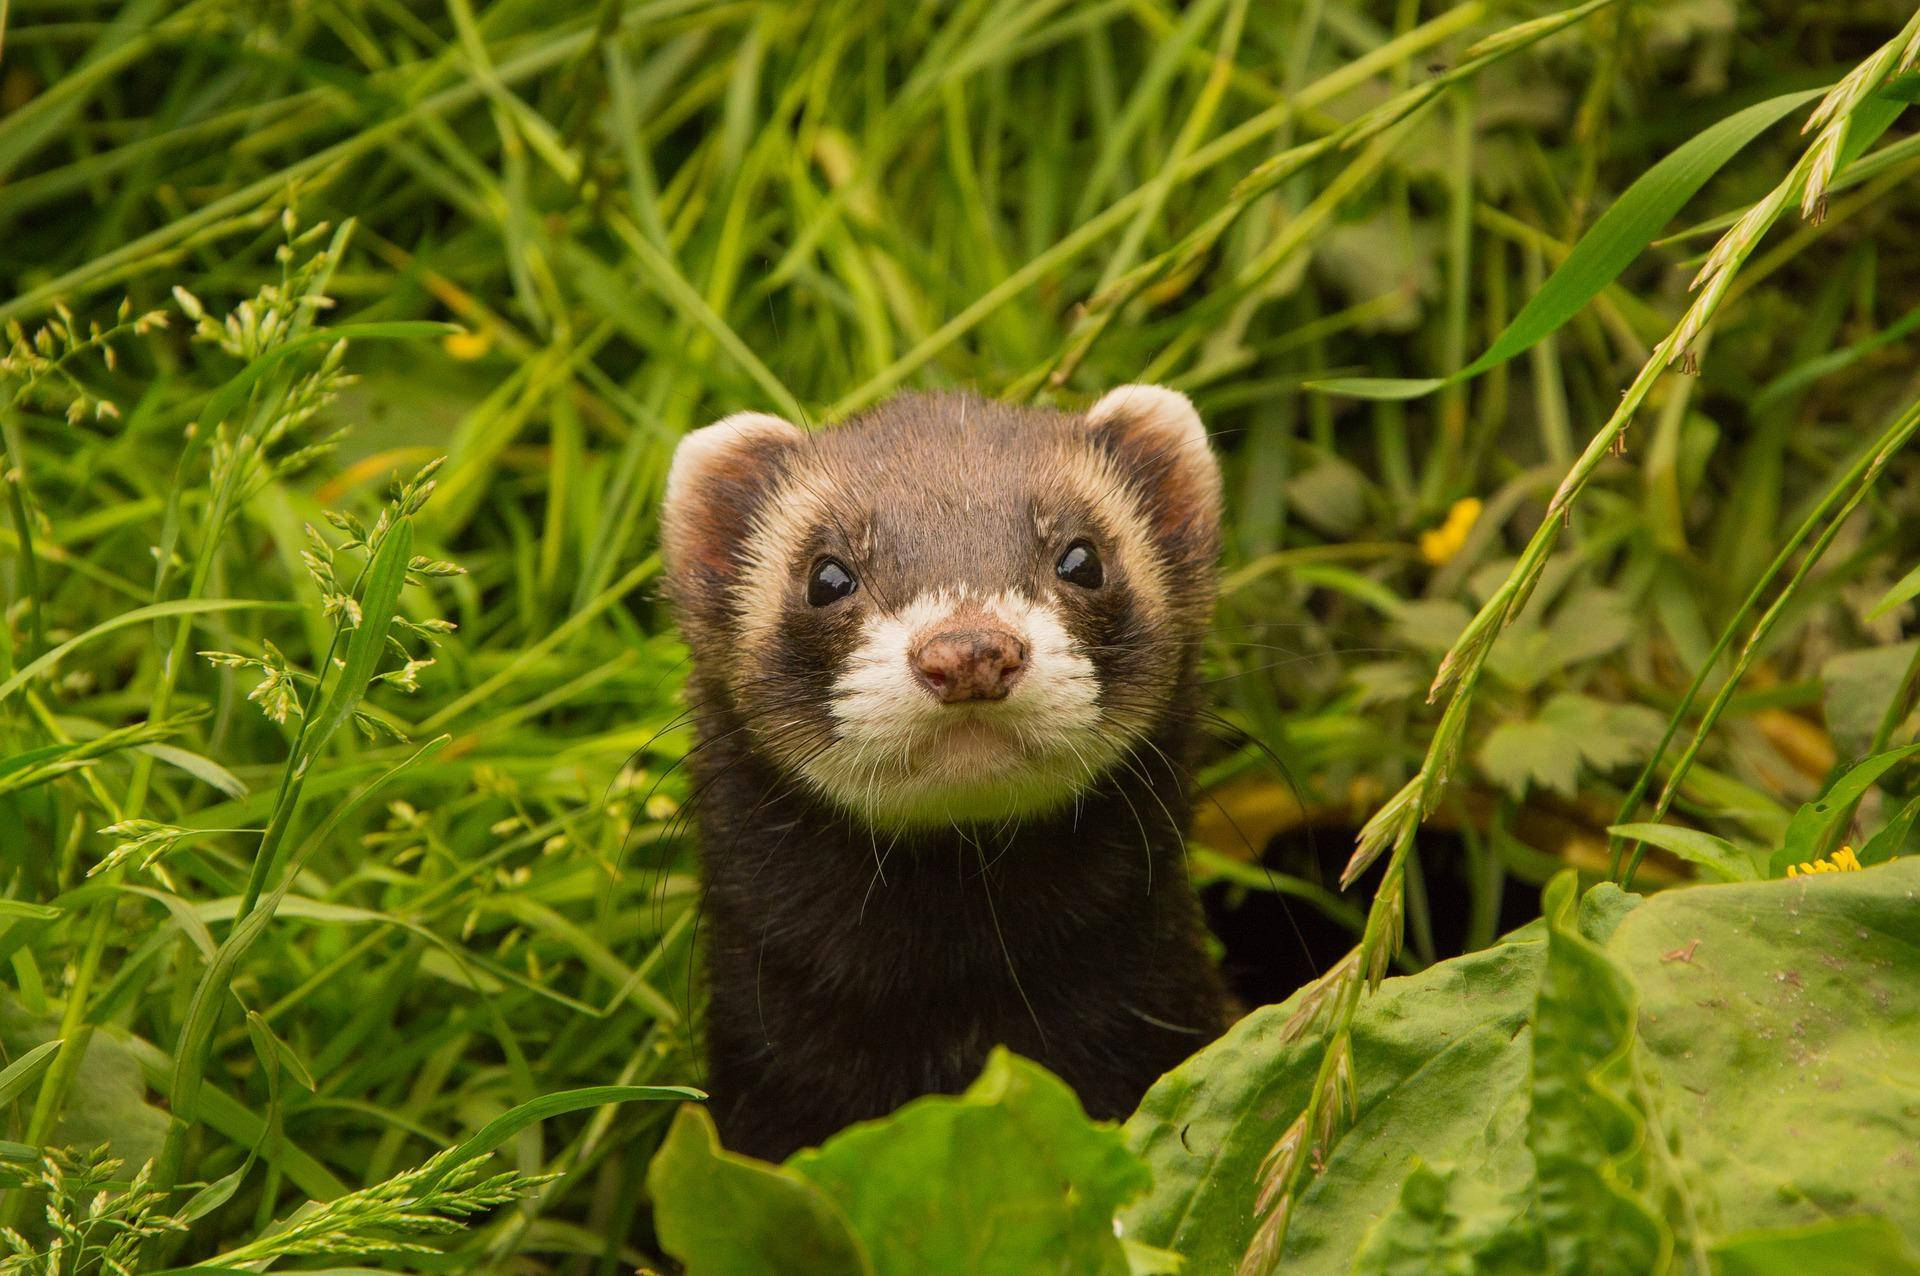 A Curious Ferret In The Green Outdoors Background